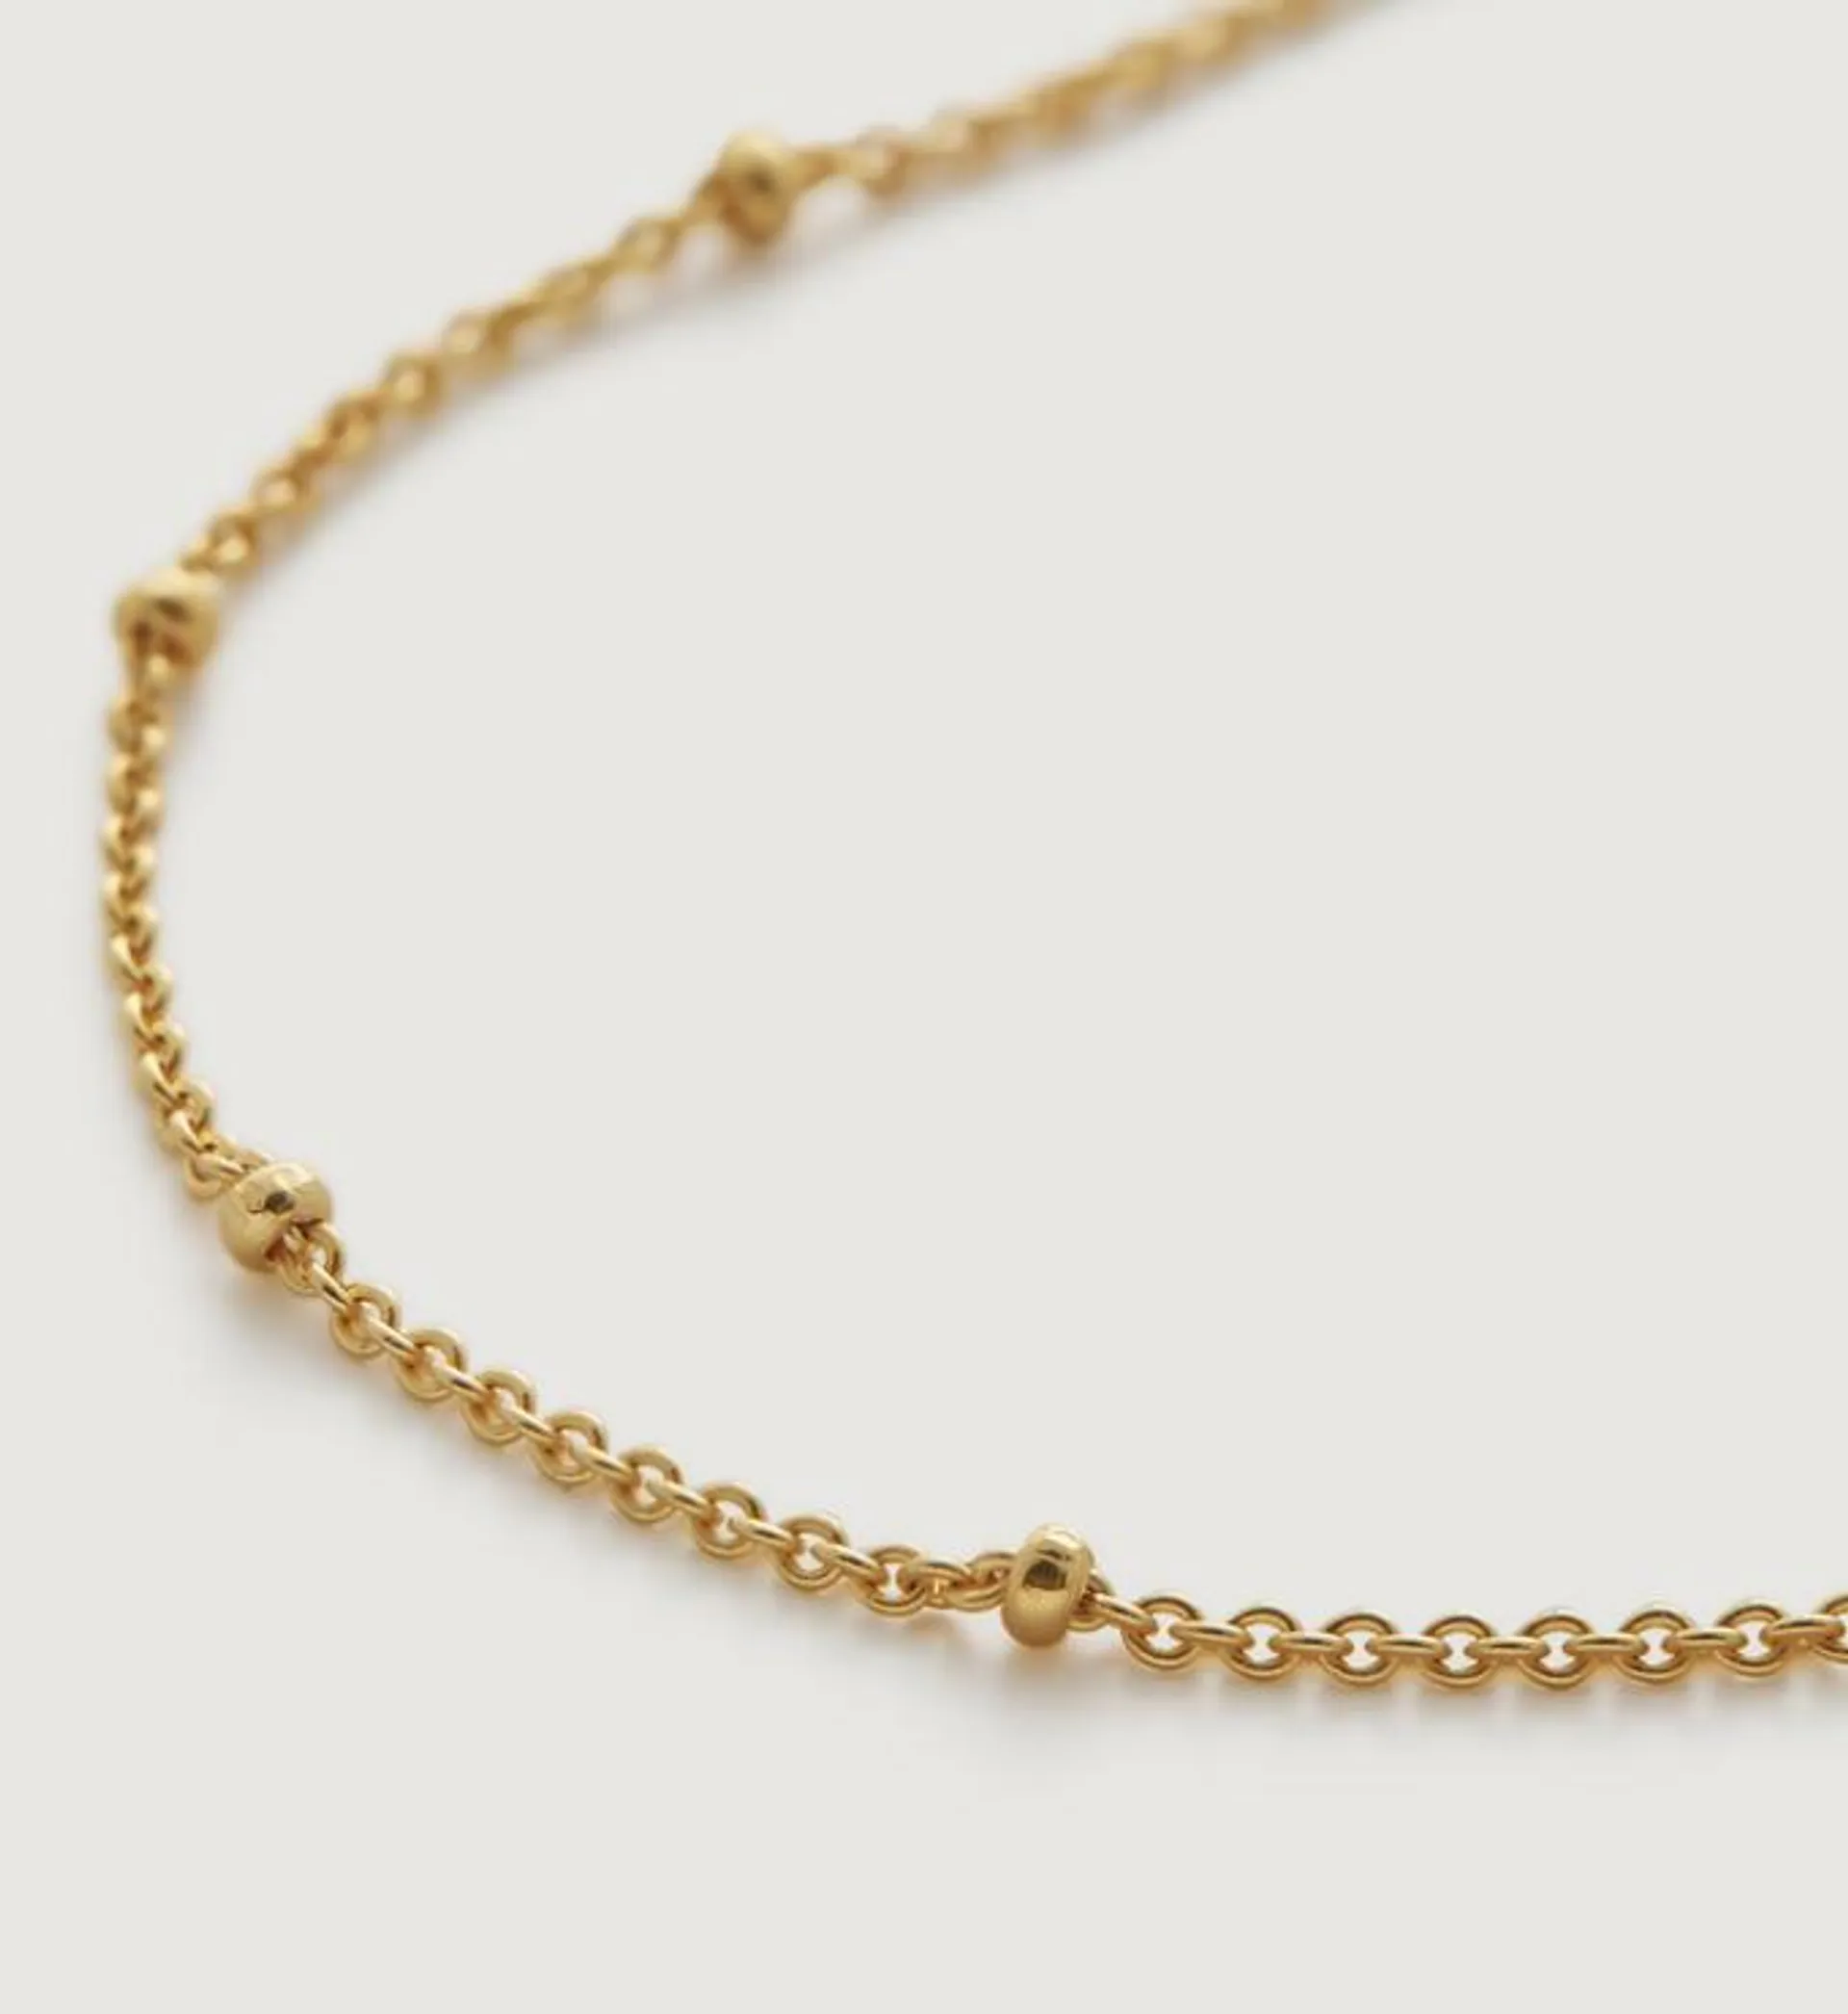 Fine Beaded Chain Necklace Adjustable 53-61cm/21-24'